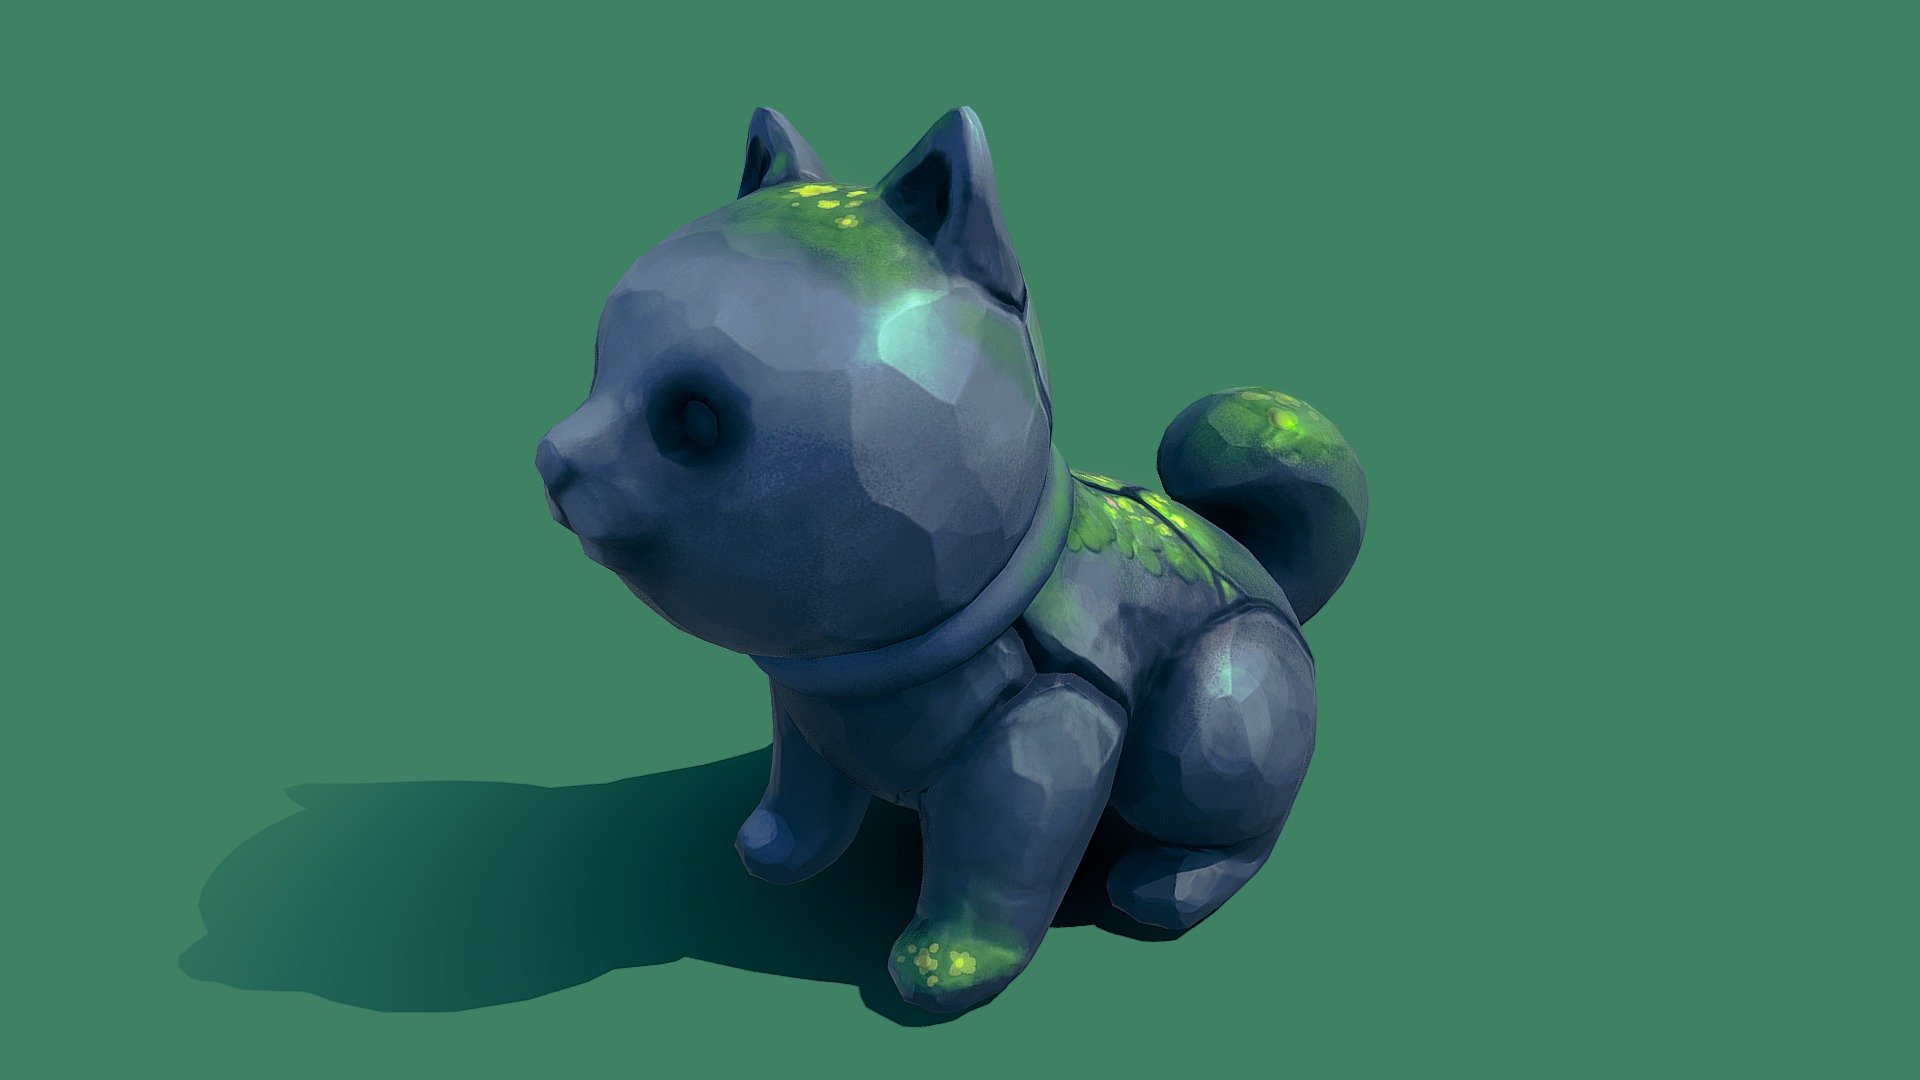 Decided to join in the Shiba texturing challenge!

I went for a mossy rock texture. This was done in Substance Painter, Zbrush and Maya

https://twitter.com/rosiejarvisart
Based on Shiba by zixisun02, licensed under CC-Attribution 3d model